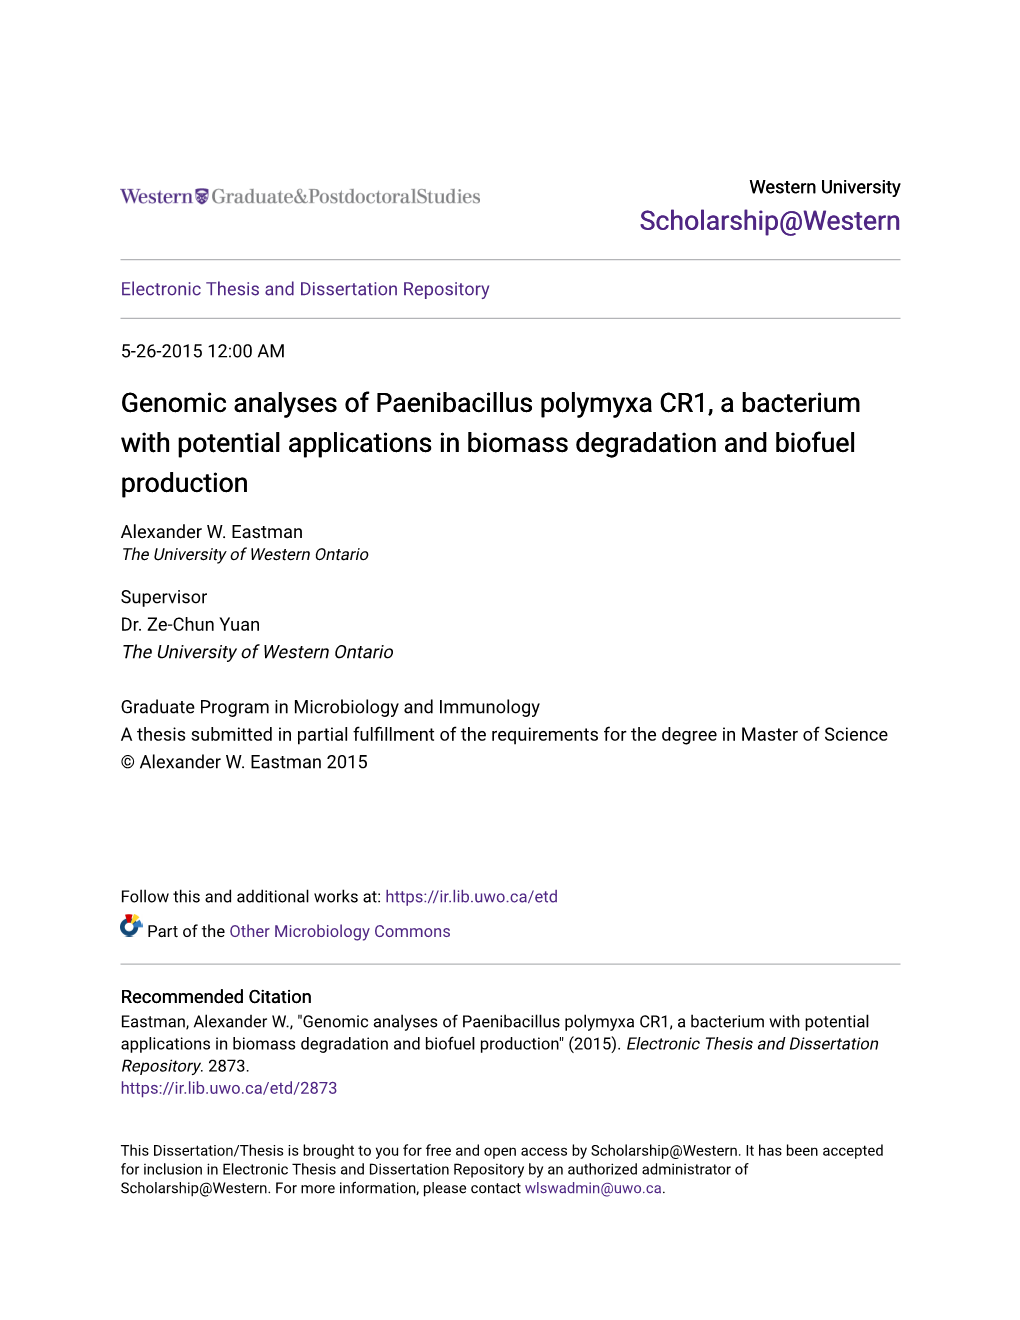 Genomic Analyses of Paenibacillus Polymyxa CR1, a Bacterium with Potential Applications in Biomass Degradation and Biofuel Production